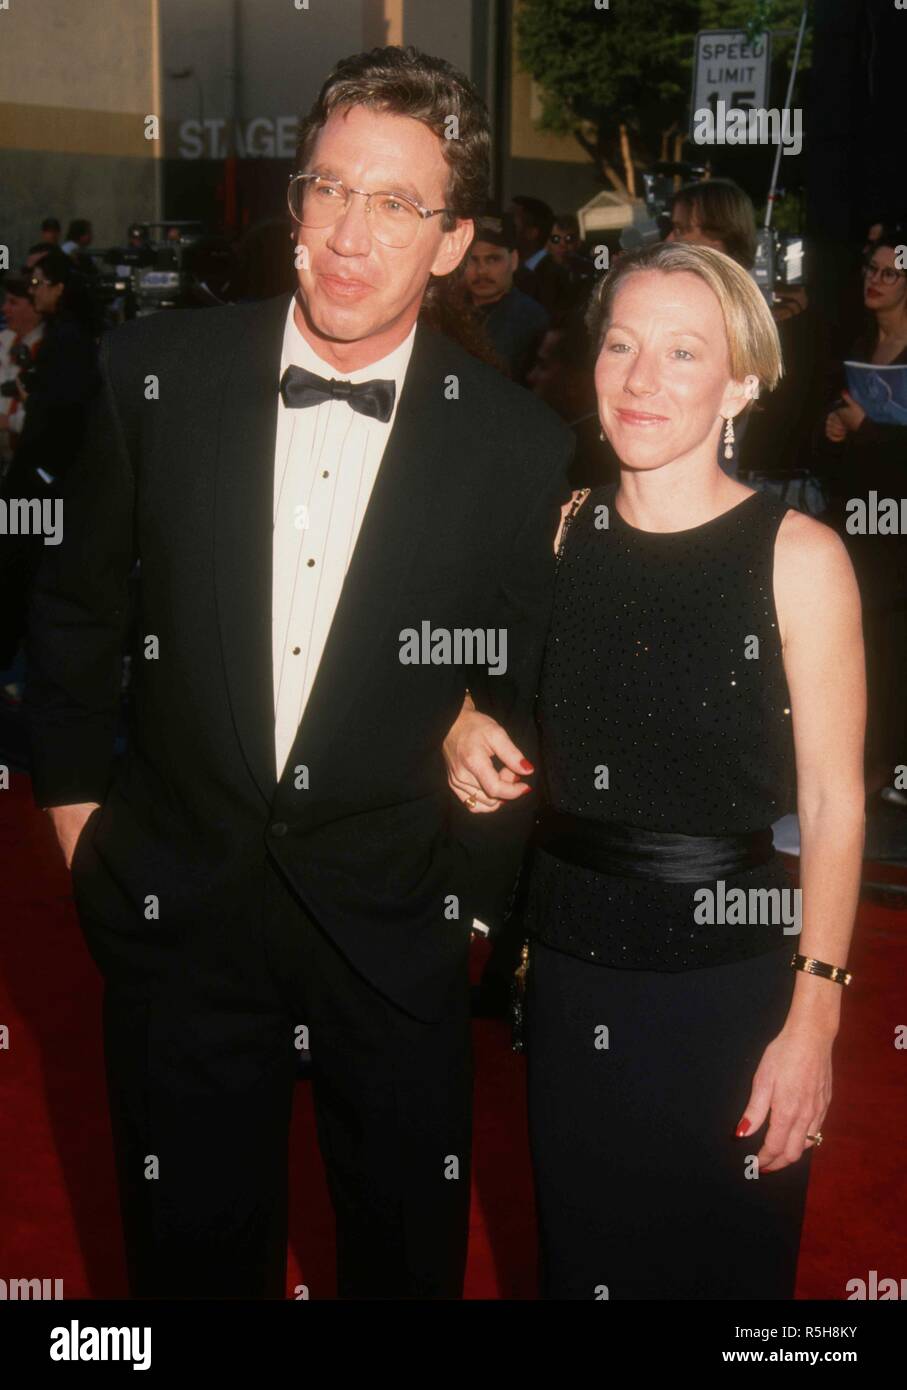 UNIVERSAL CITY, CA - MARCH 9: Actor Tim Allen and Laura Deibel attend the 19th Annual People's Choice Awards on March 9, 1993 at Unversal Studios in Universal City, California. Photo by Barry King/Alamy Stock Photo Stock Photo